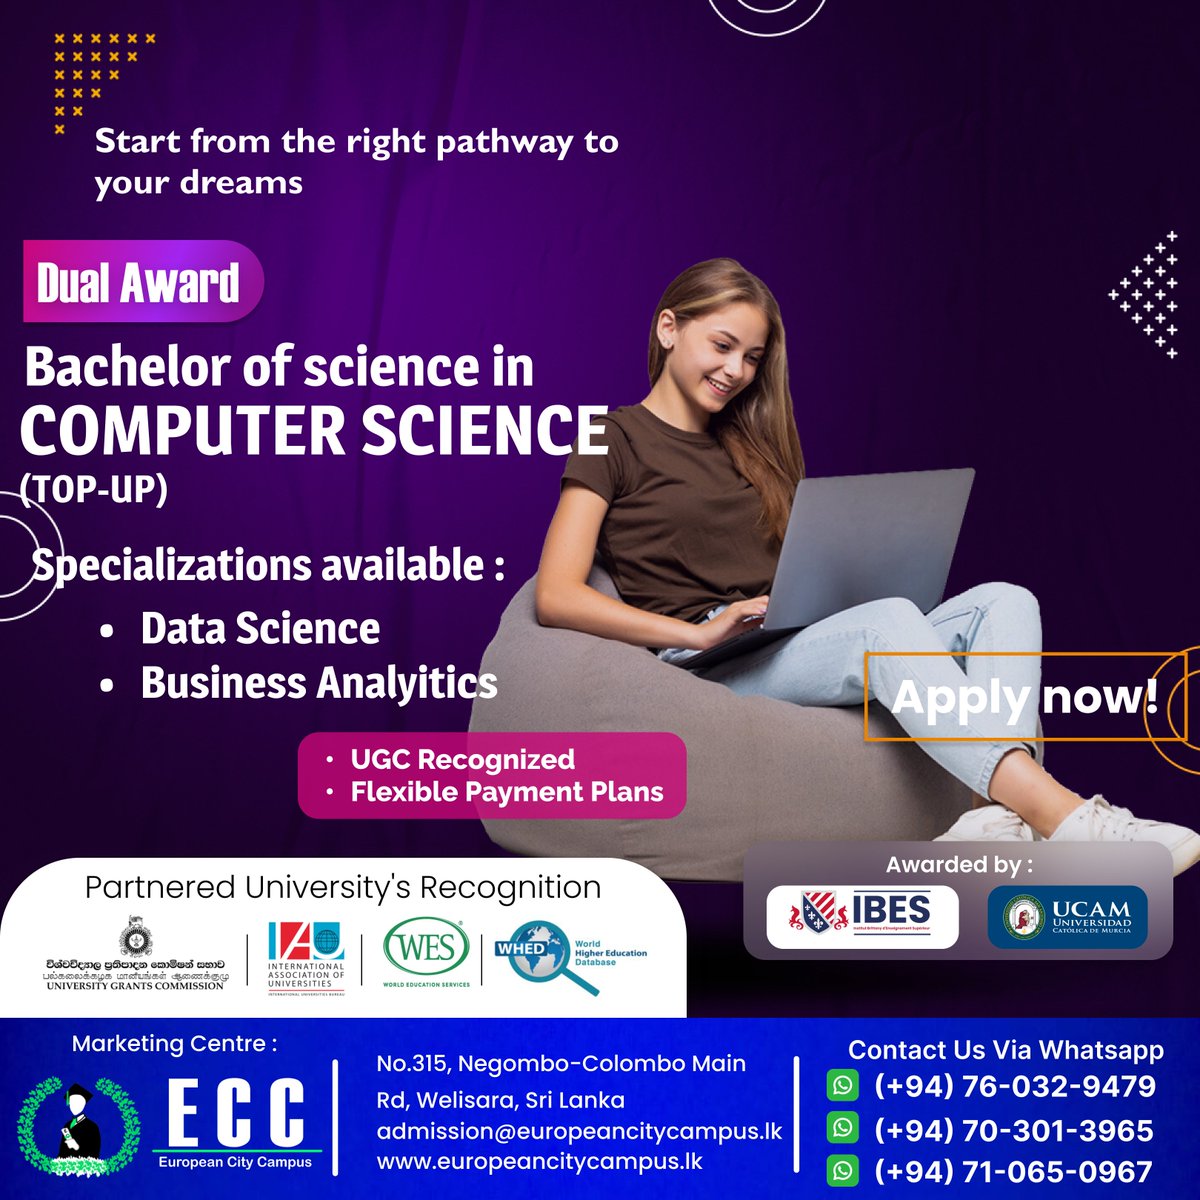 💻 Start your journey into technology with our Bachelor of Science in Computer Science program! 🌟
Connect with us on WhatsApp:
📲 (+94) 76 032 9479
📲 (+94) 70 301 3965
📲 (+94) 71 065 0967
 #ComputerScience #DataScience #BusinessAnalytics #TechCareers #europeancitycampus